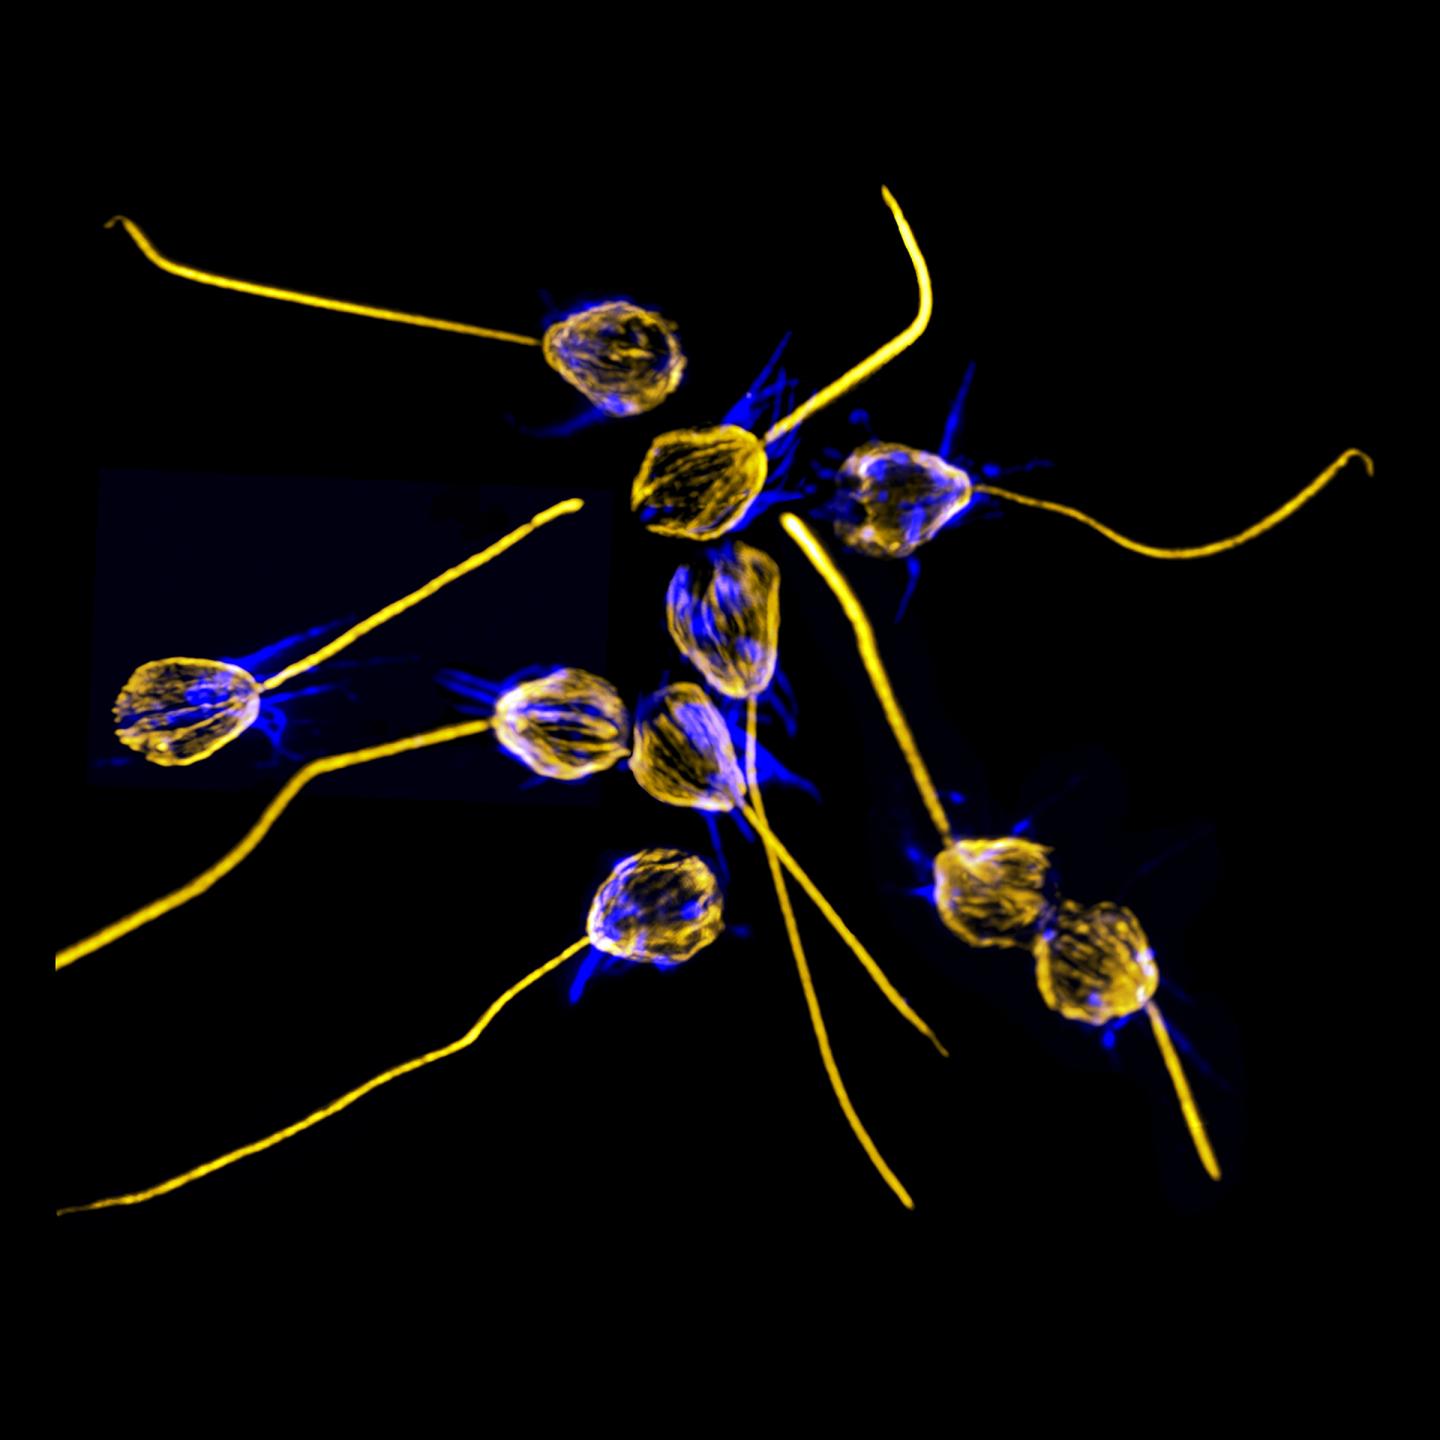 A mating swarm of the marine choanoflagellate s. Rosetta, triggered by the bacterium v. Fischeri. Tubulin is labeled gold, highlighting the cell body and flagellum, while the protein actin is labeled blue, showing off the organism's distinctive collar.